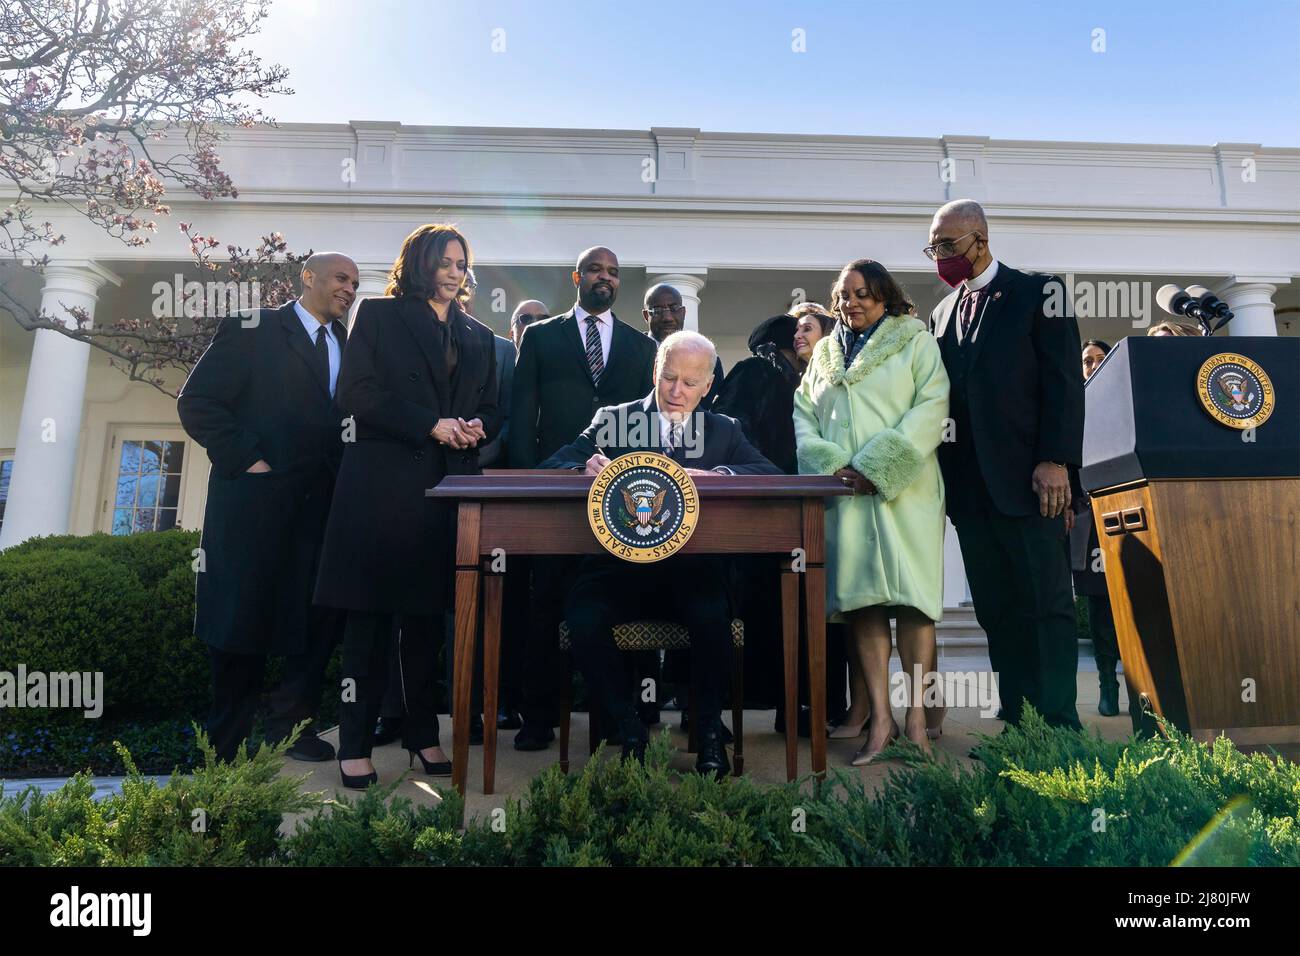 U.S President Joe Biden signs H.R. 55, the Emmett Till Anti-lynching Act, as Vice President Kamala Harris, left, and members of Congress look on in the Rose Garden of the White House, March 29, 2022 in Washington, D.C. Stock Photo